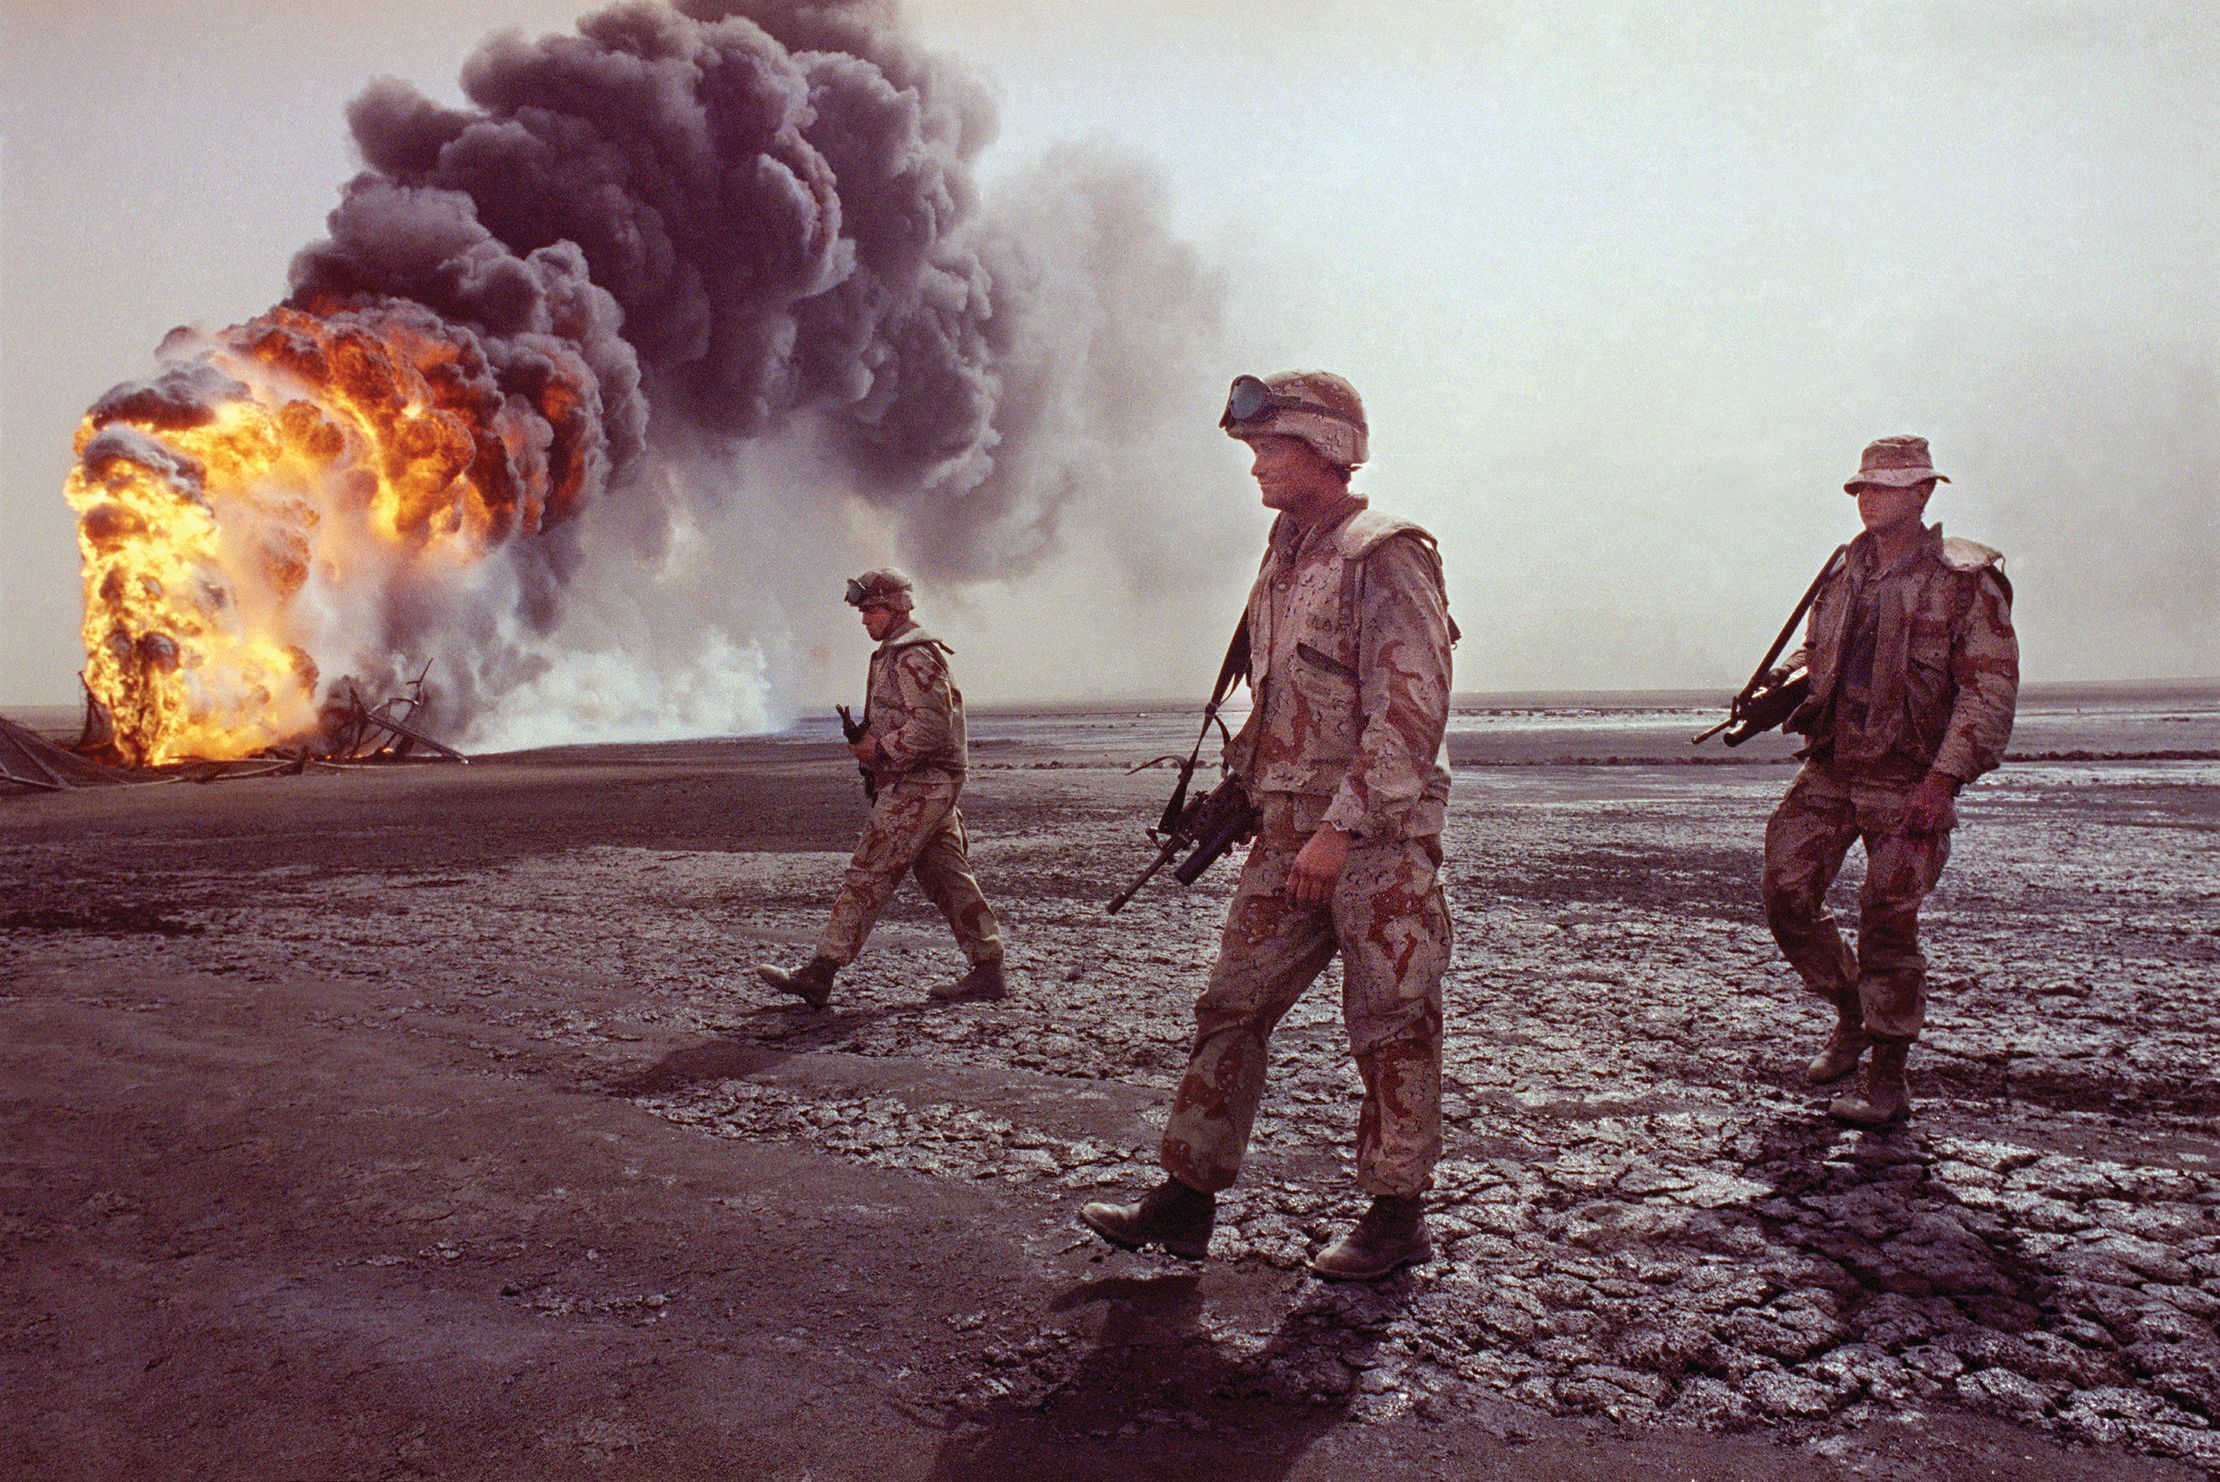 U.S. Marines walk through a desert landscape charred by burning oil fires. U.S. forces benefitted in the Gulf War from sophisticated technologies, including night-vision goggles for soldiers and Marines, forward-looking infrared pods for aircraft, and thermal and optical gun sights for tank crews. 